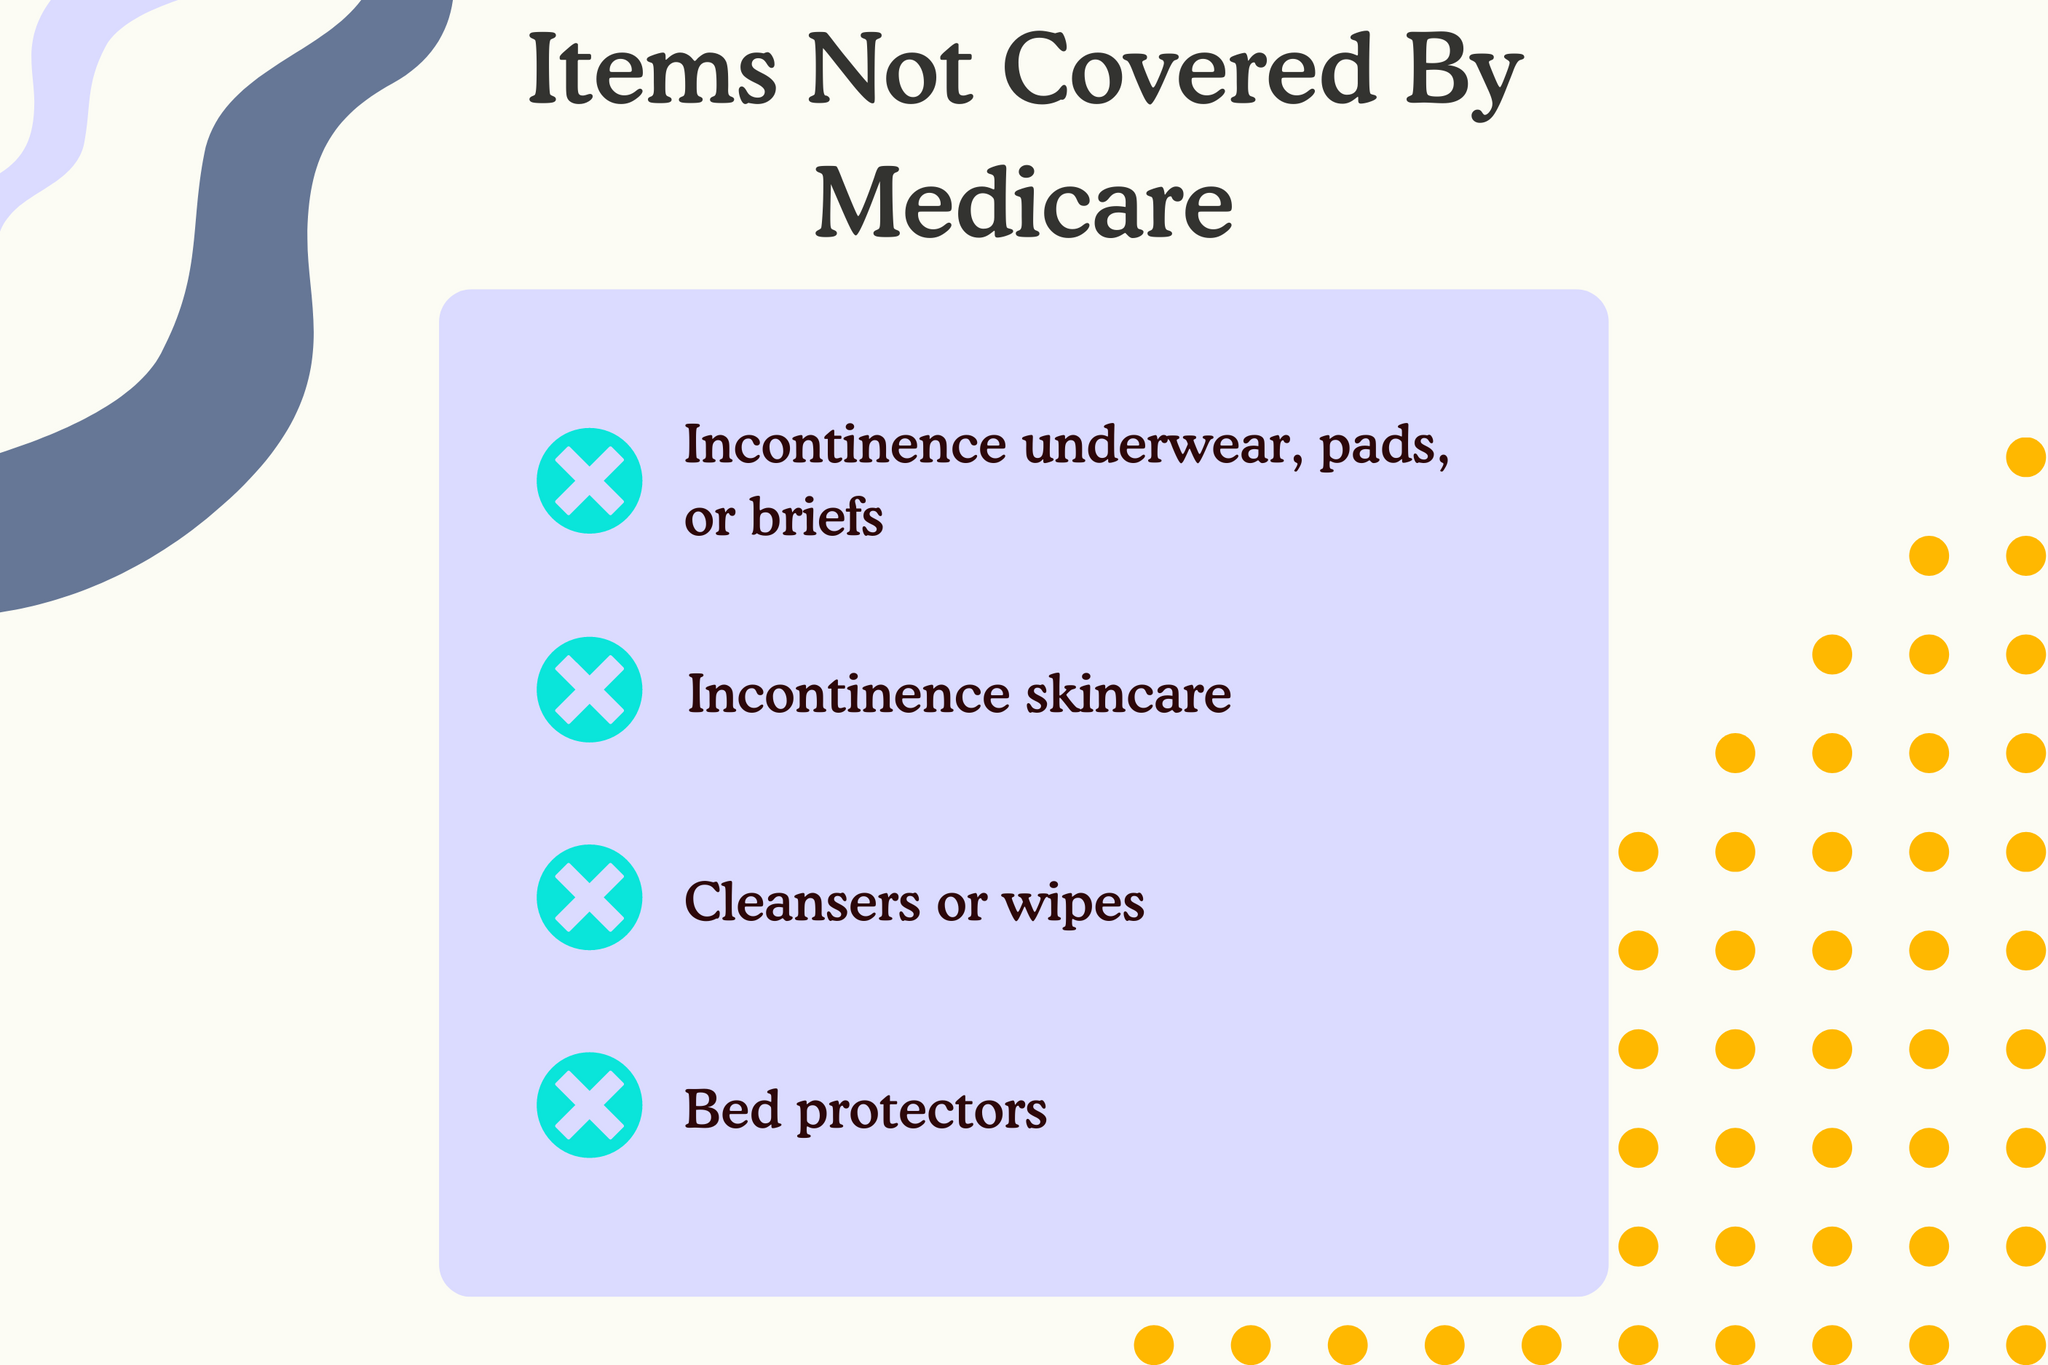 An infographic which lists the products not covered by medicare.